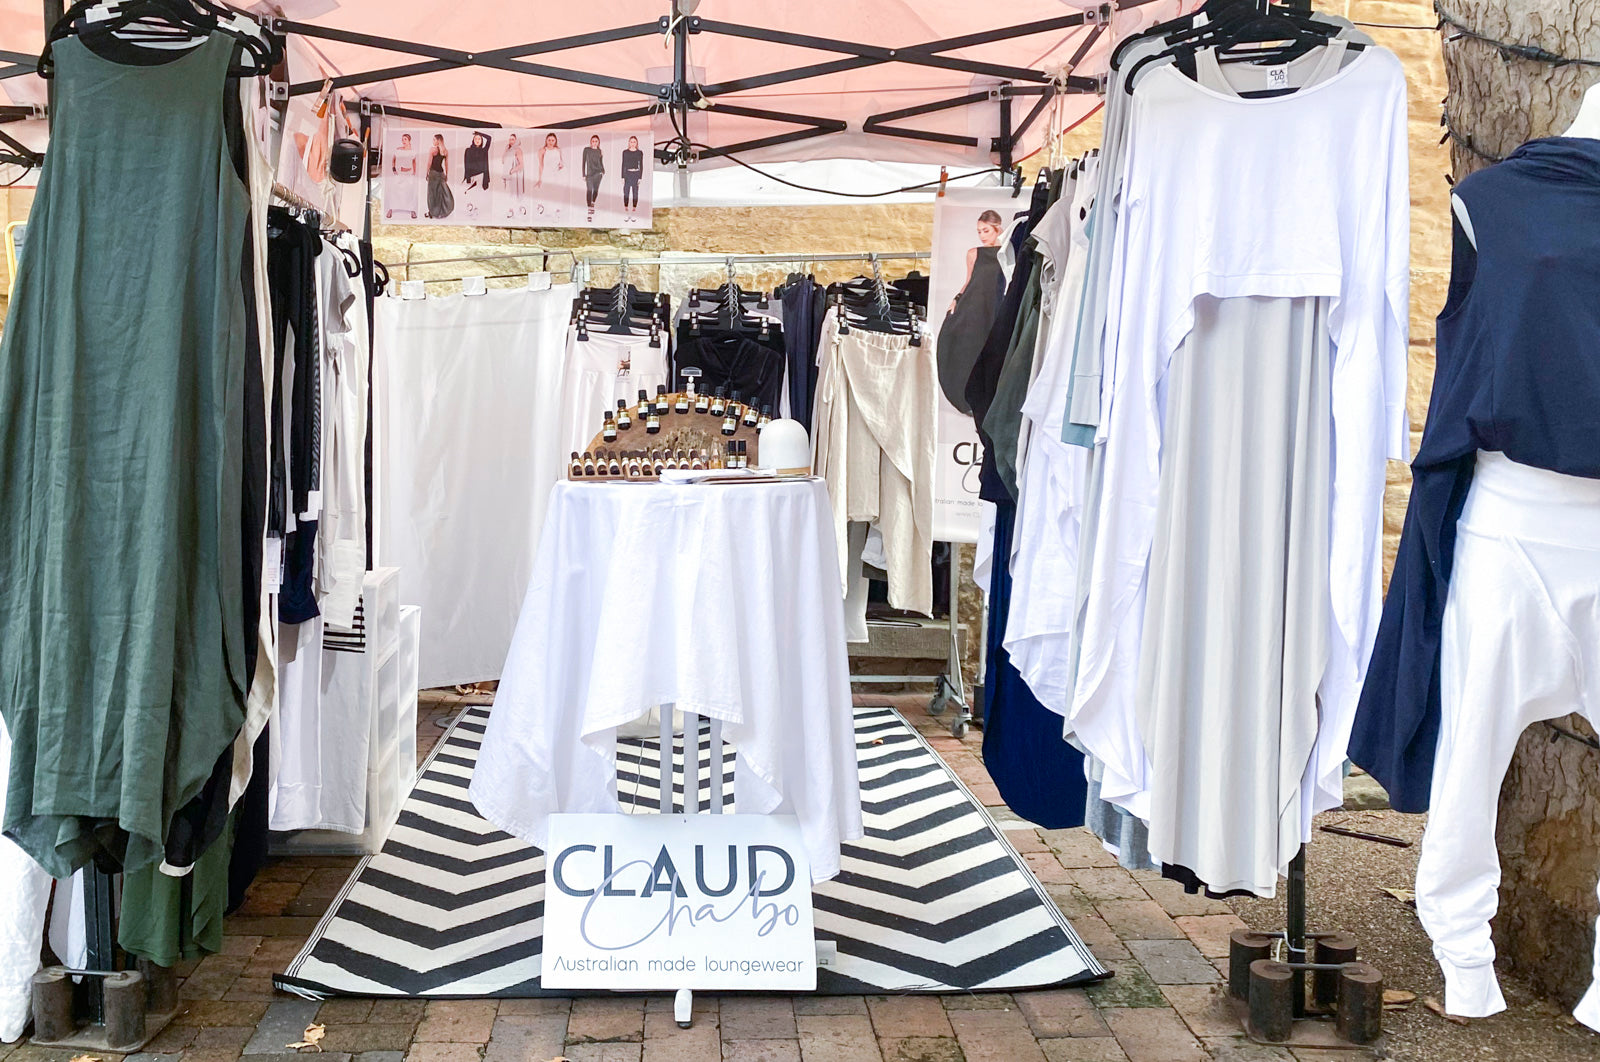 Claud Chabo market stall displaying a variety of garments under a tent